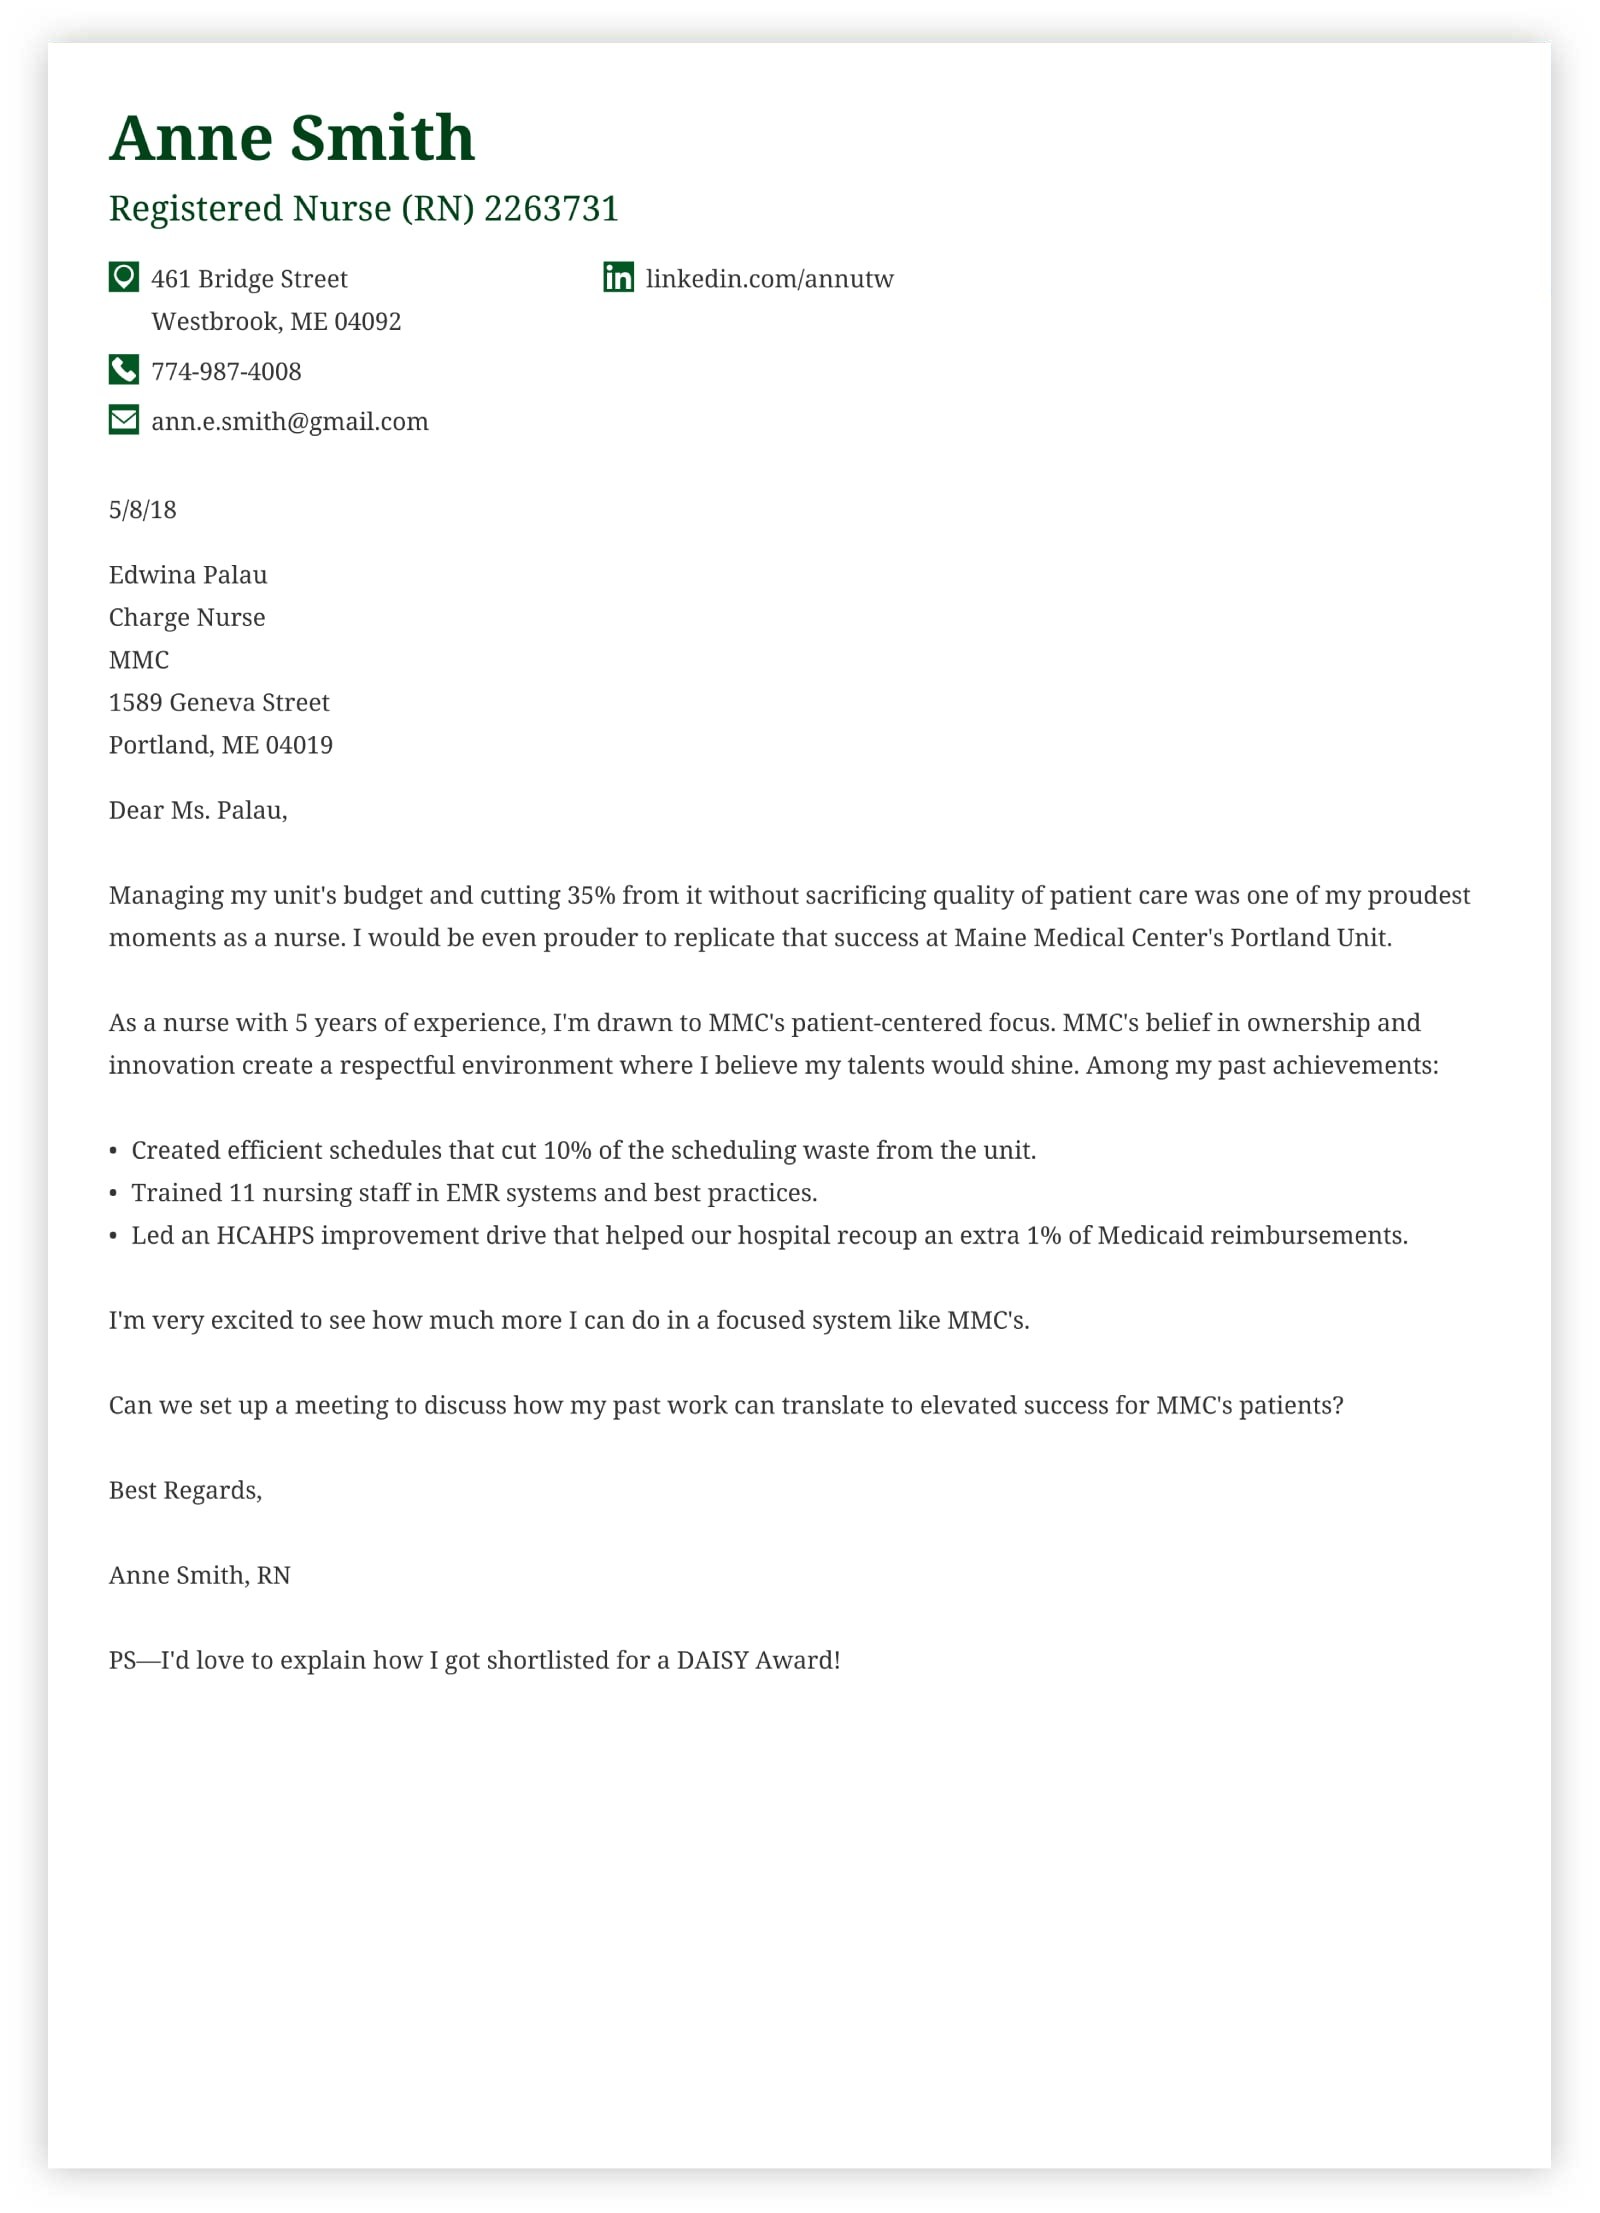 Successful Cover Letter Template from cdn-images.zety.com